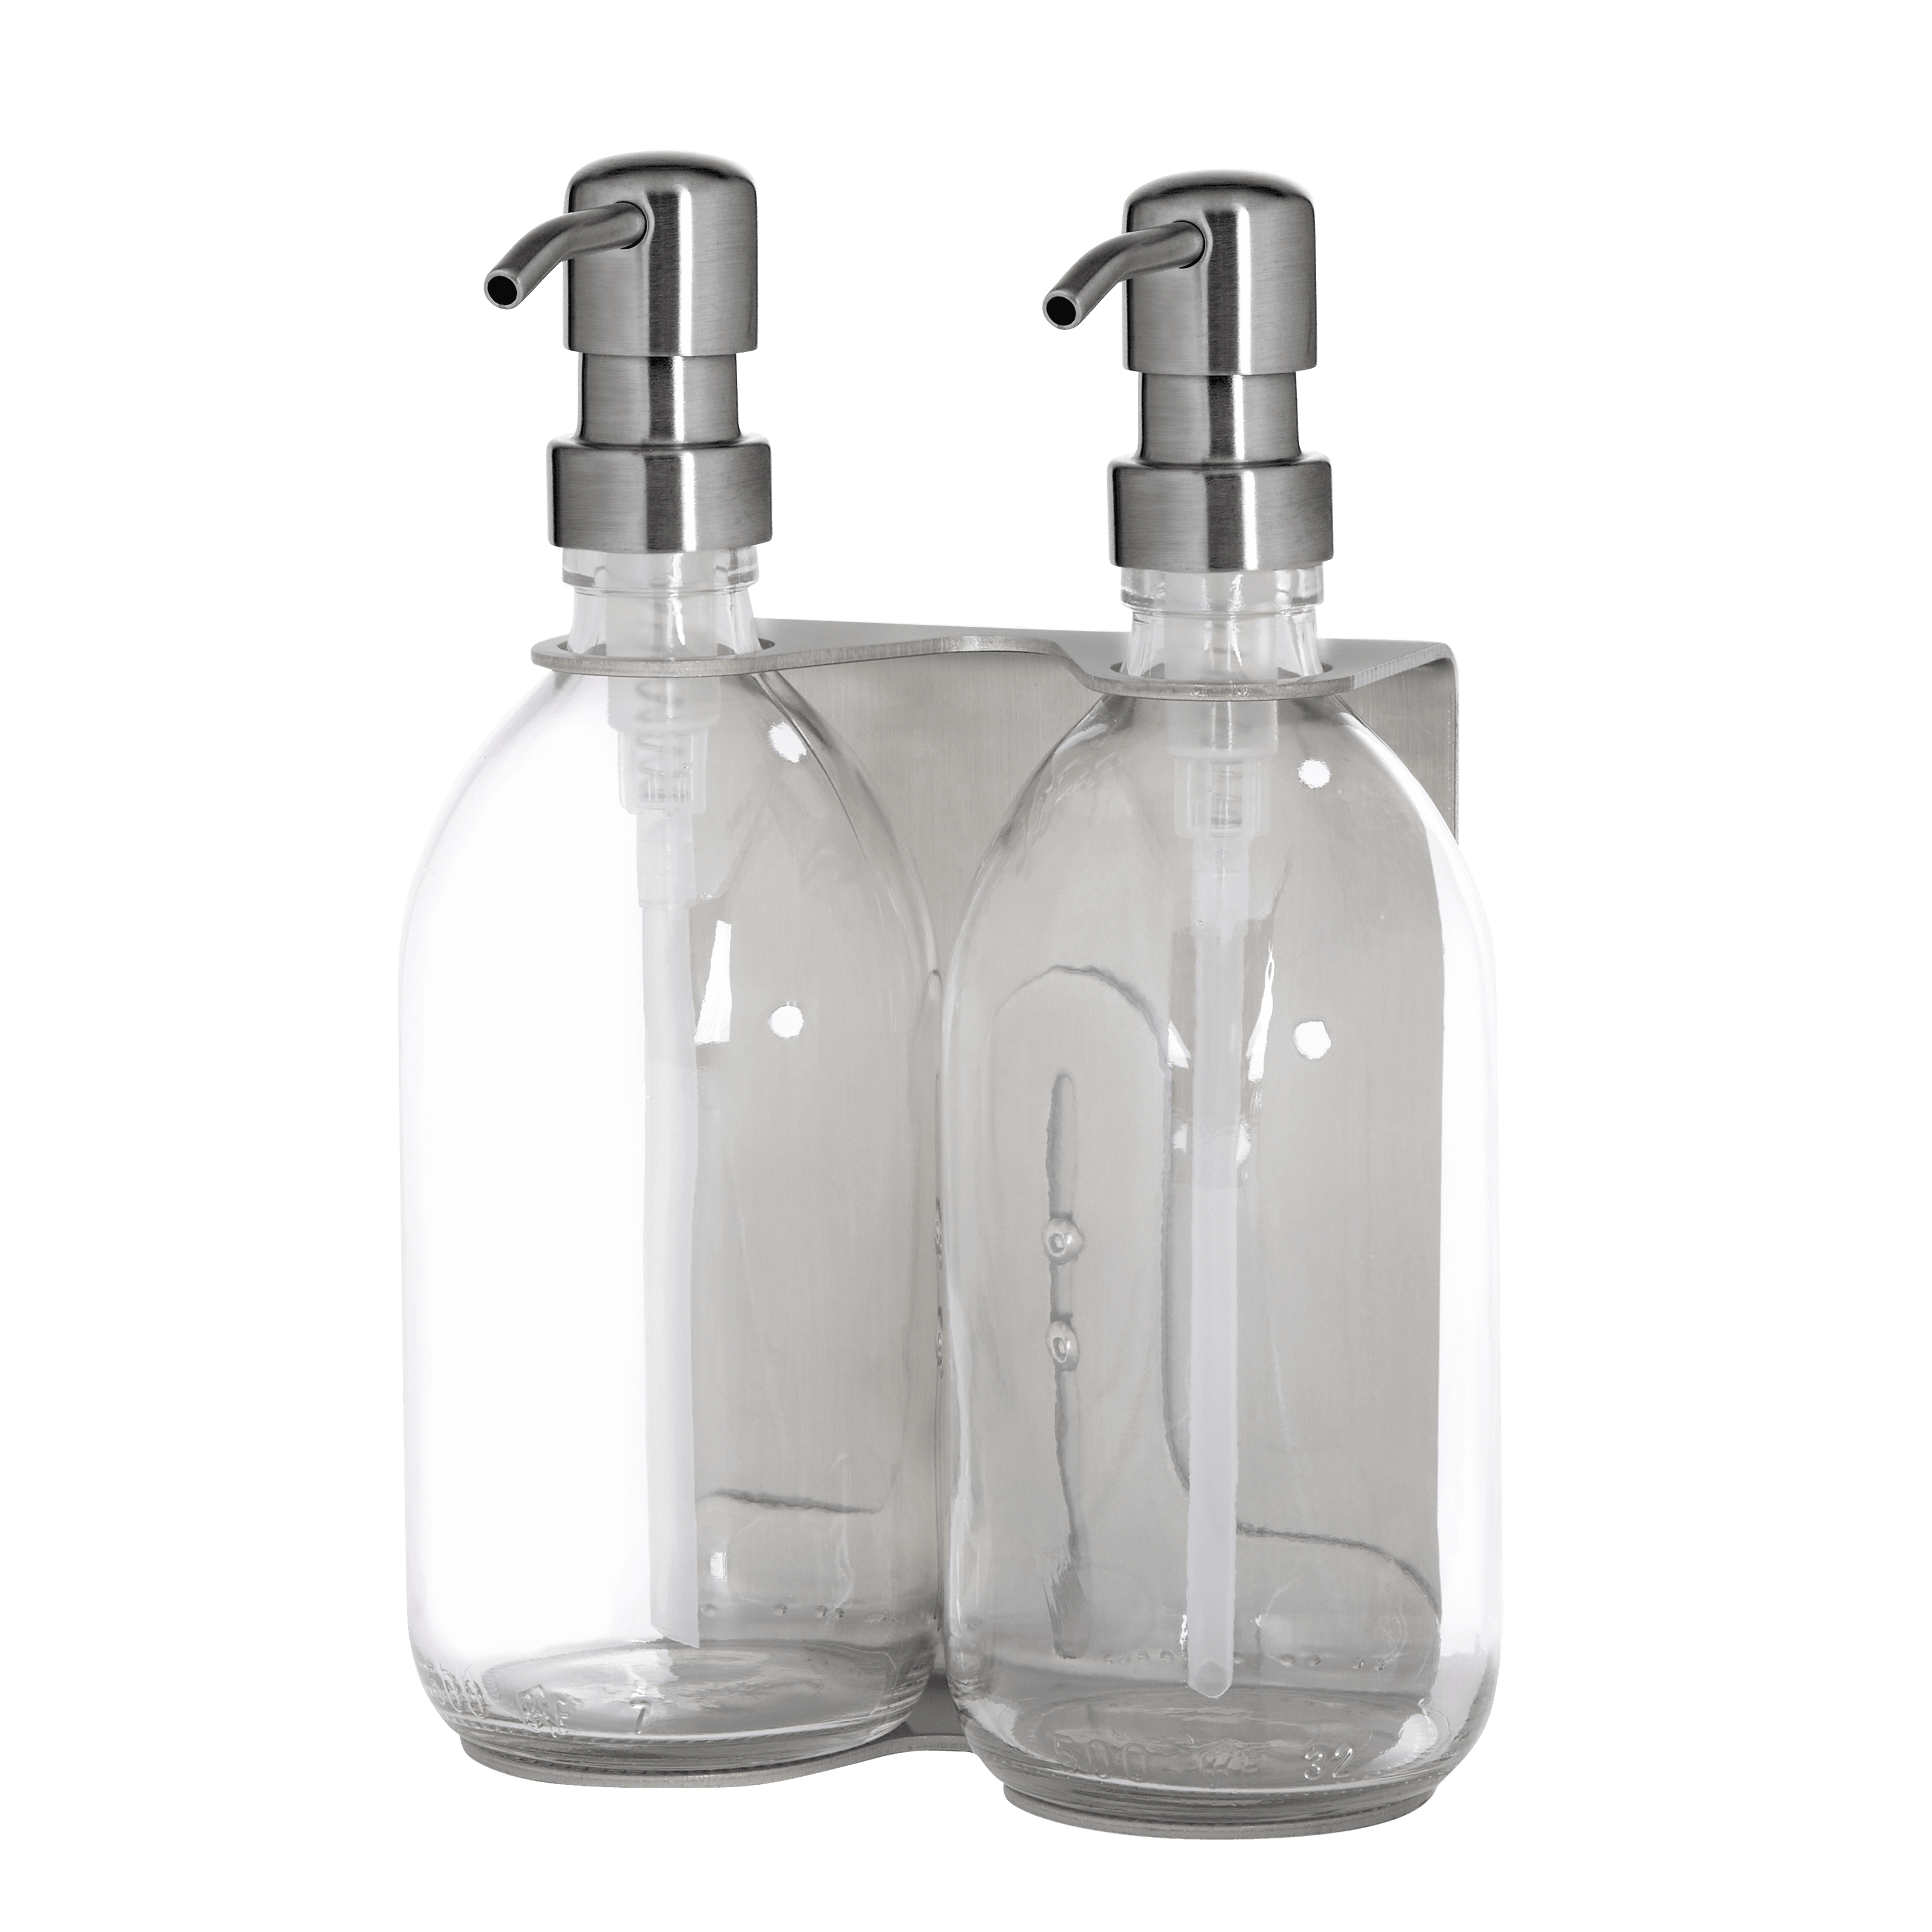 Satin Silver Double Wall Mounted Soap Dispenser with clear dispensers bottles and matching silver metal pump